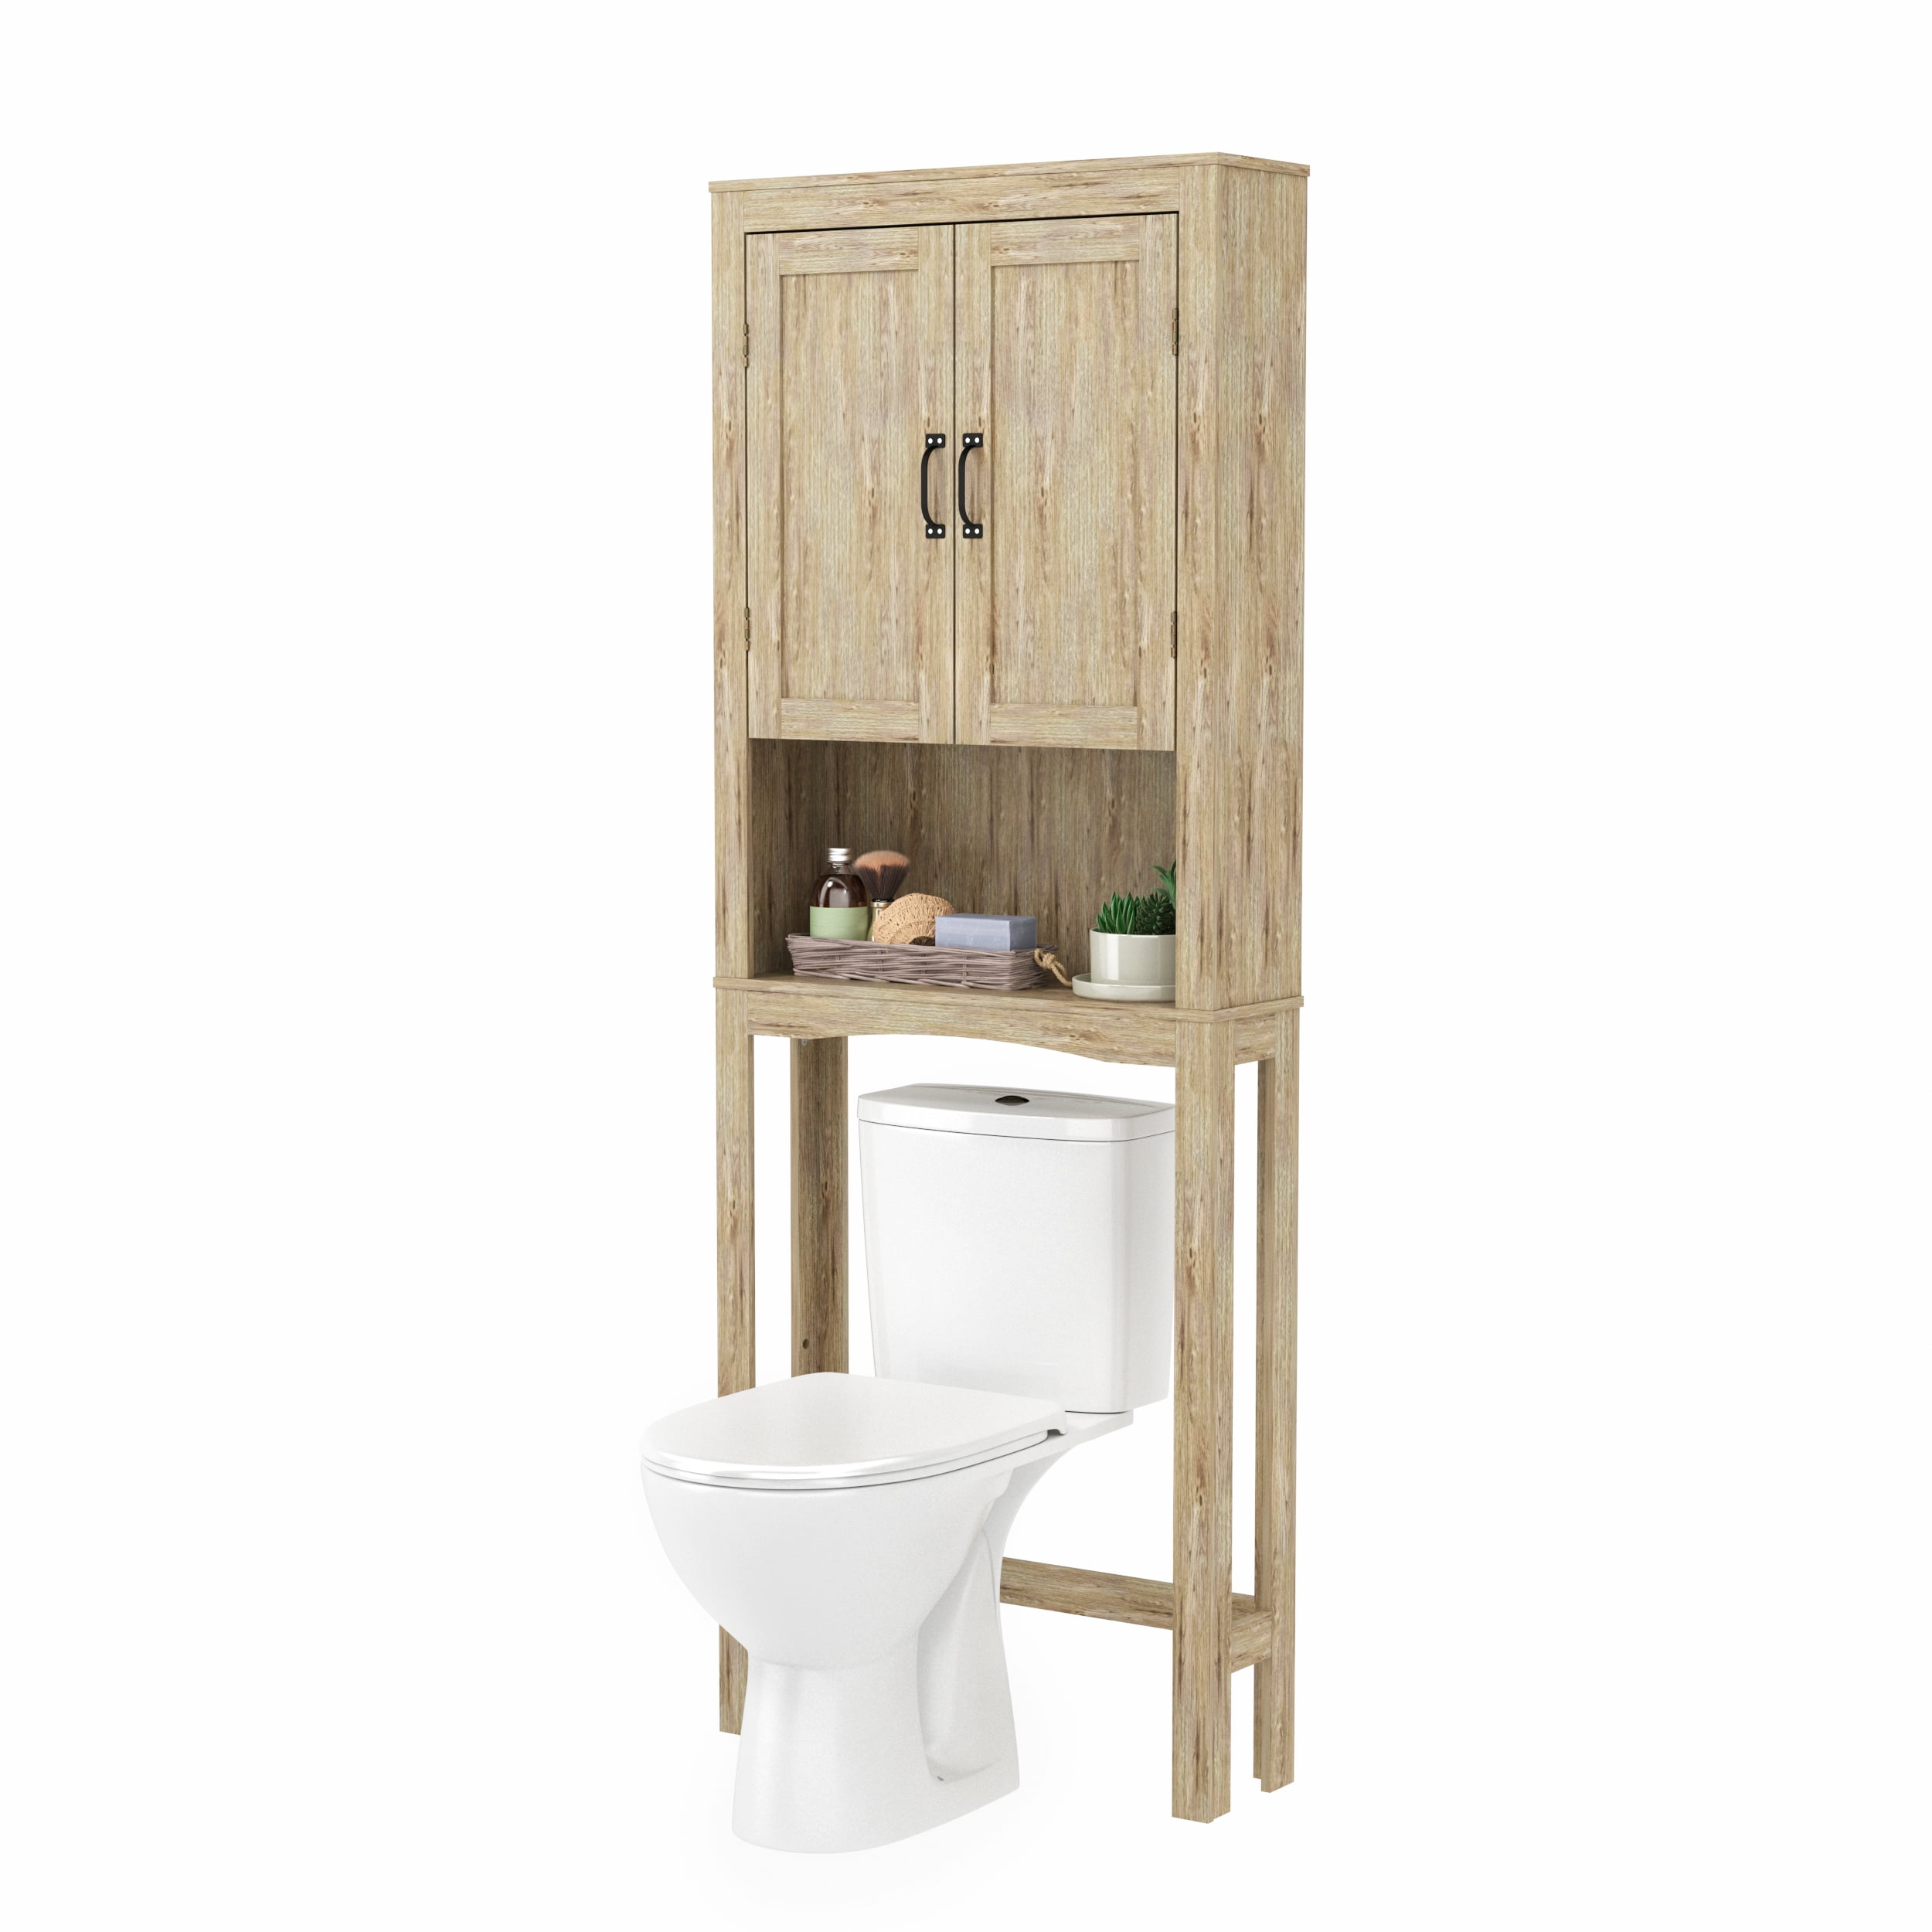 Lxing Over The Toilet Bathroom, Solid Wood Free Standing Over The Toilet Storage Ikea